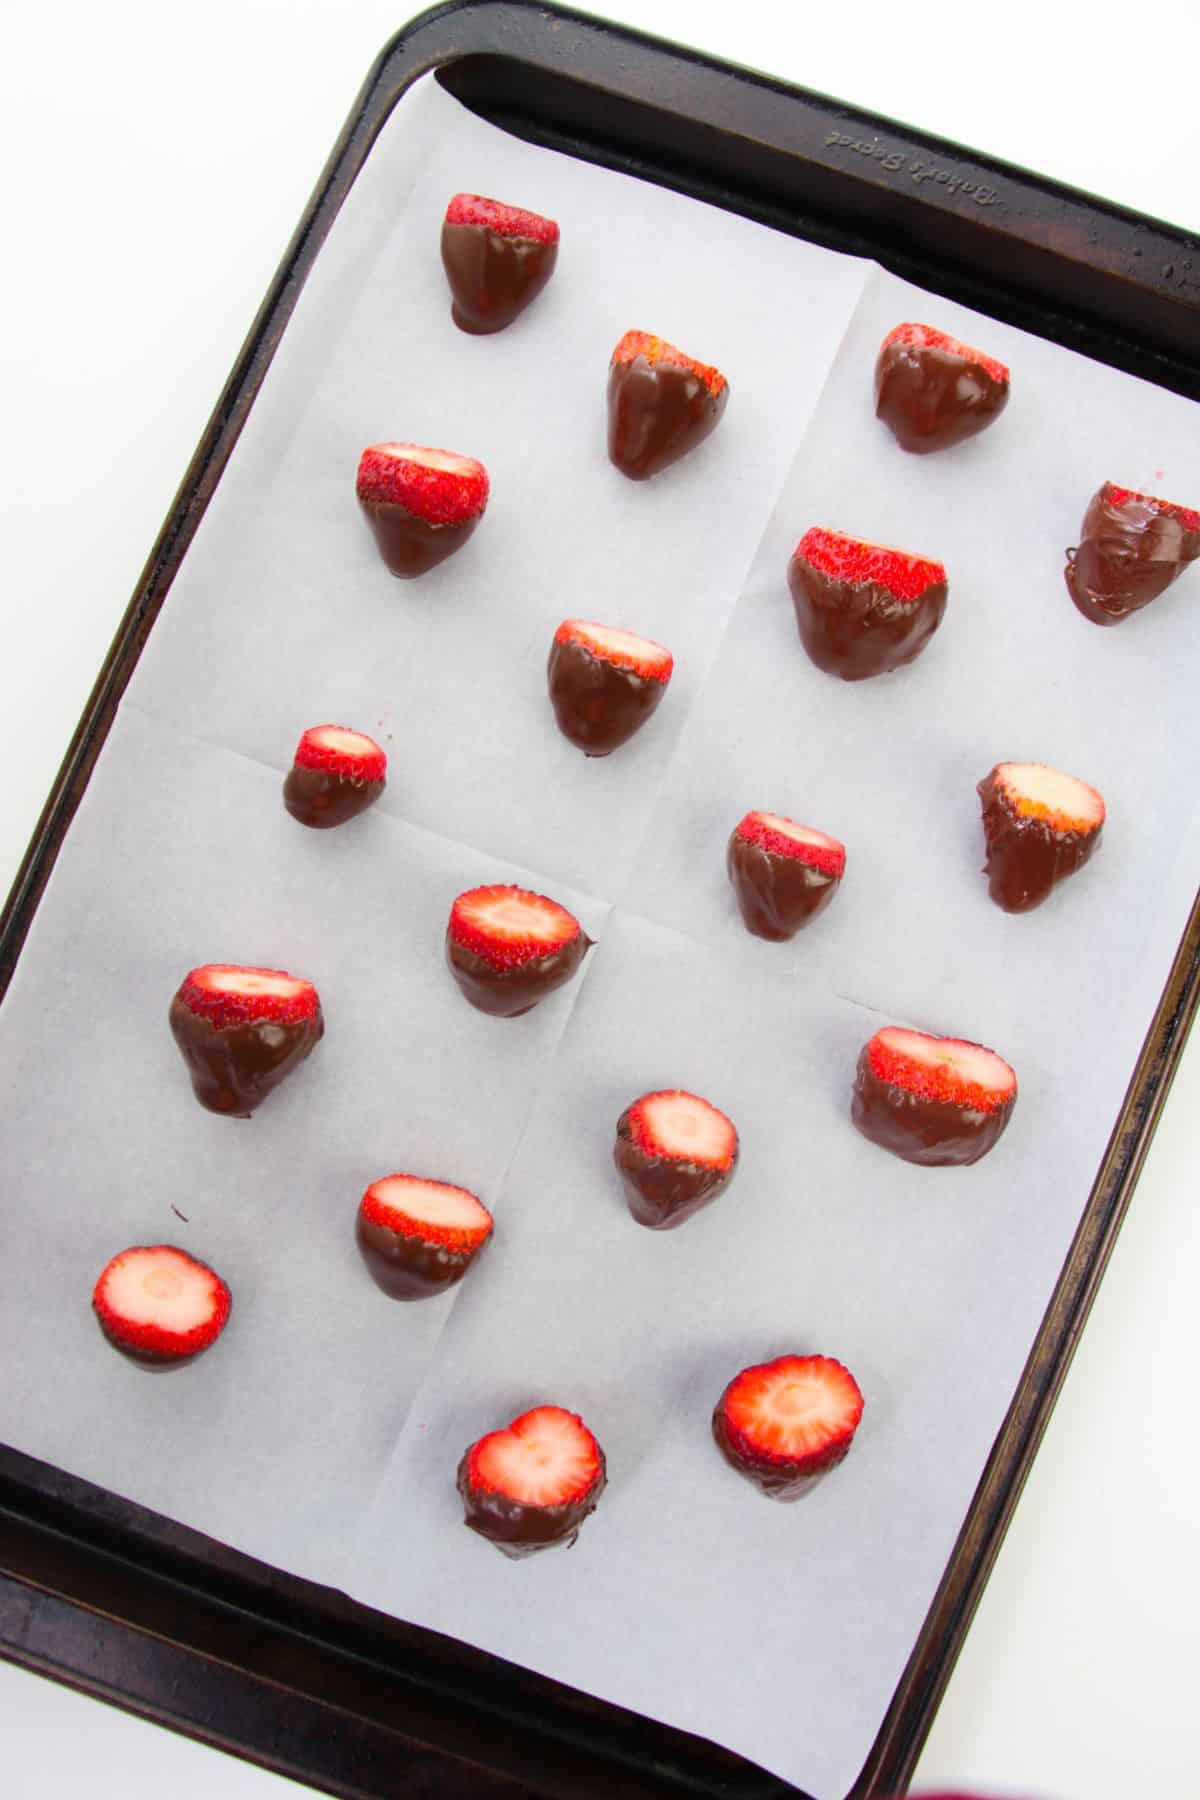 Chocolate-coated strawberries on a baking sheet.